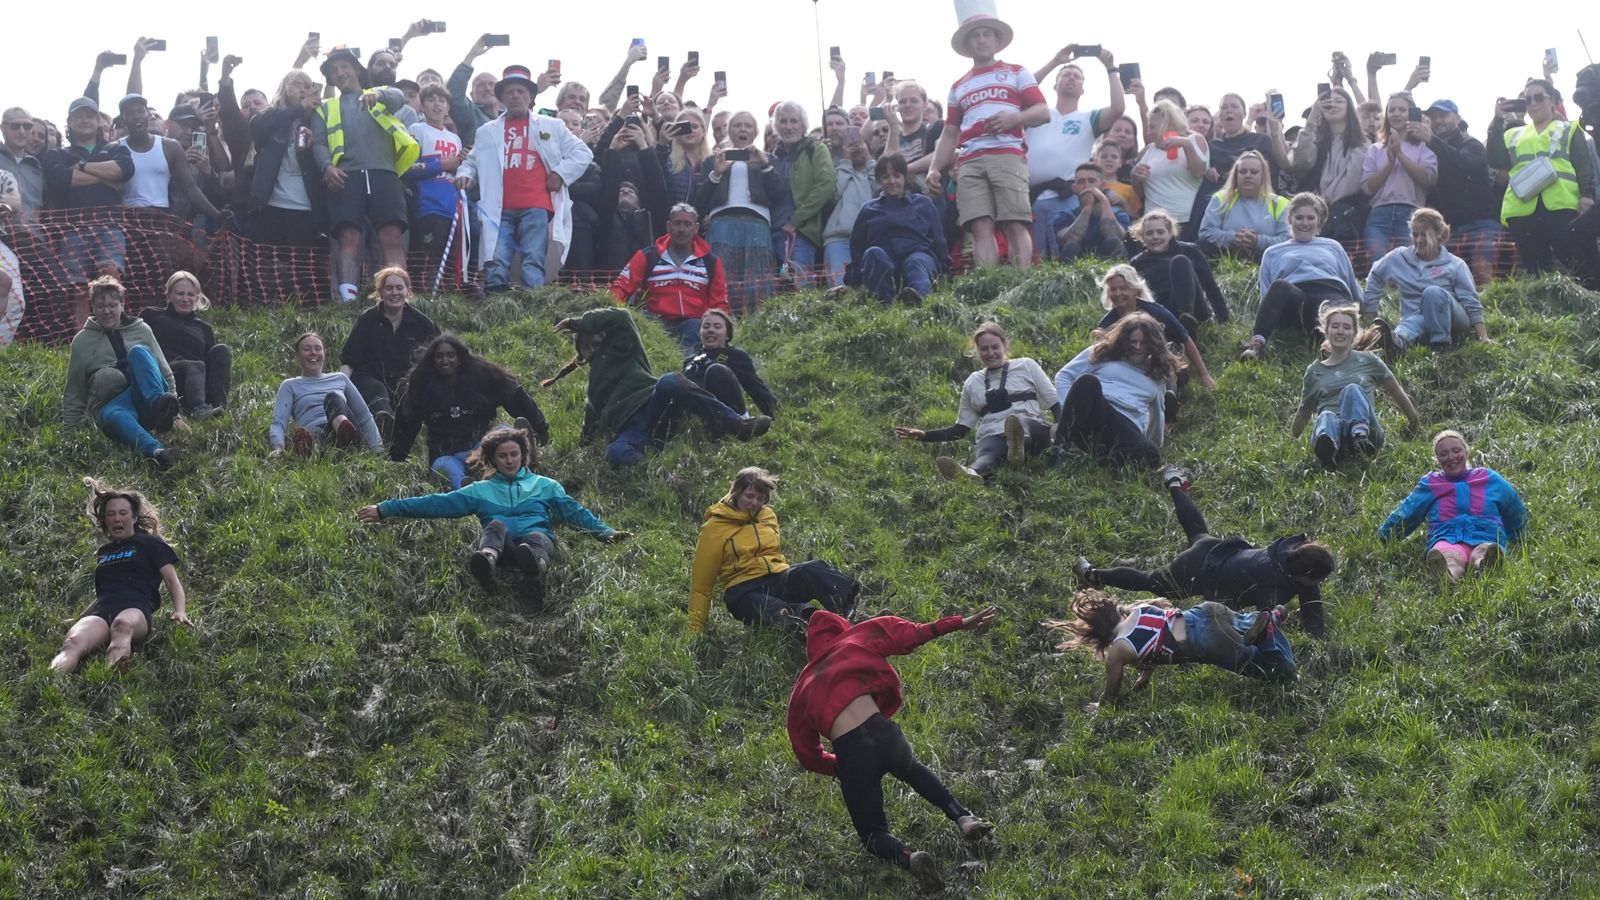 Cheese rolling: Dairy-loving daredevils descend on Cooper's Hill in Gloucestershire for annual race